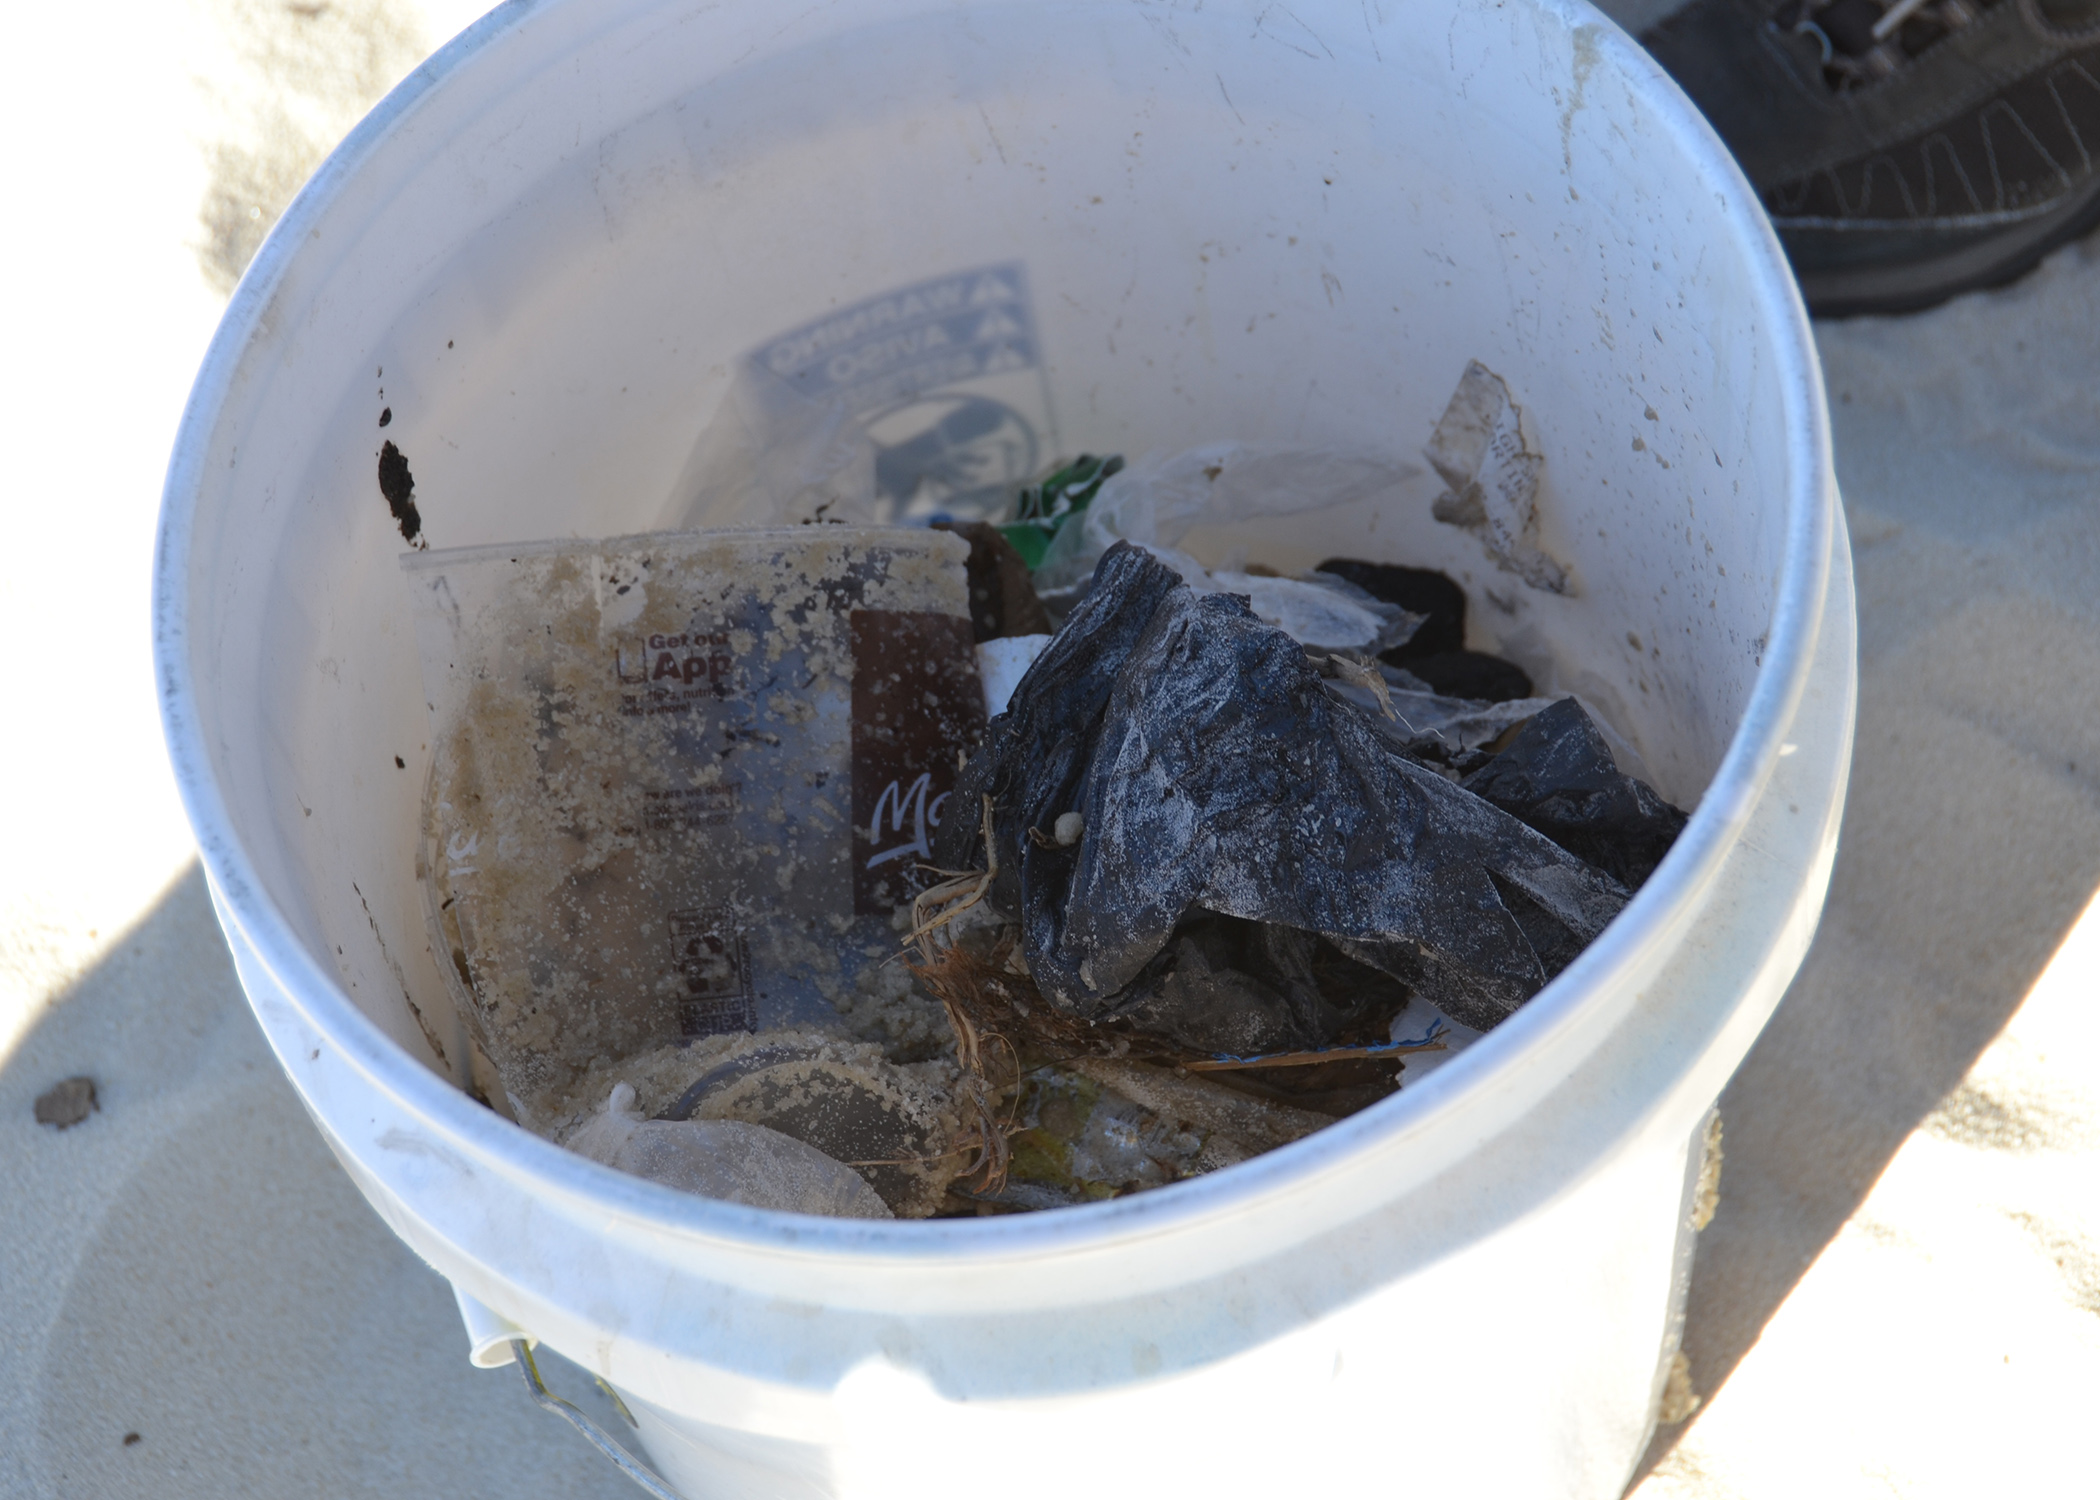 Trash, including plastic cups and plastic bags, fill a white five gallon bucket at a recent Mississippi Coastal Cleanup event in Biloxi, Mississippi.